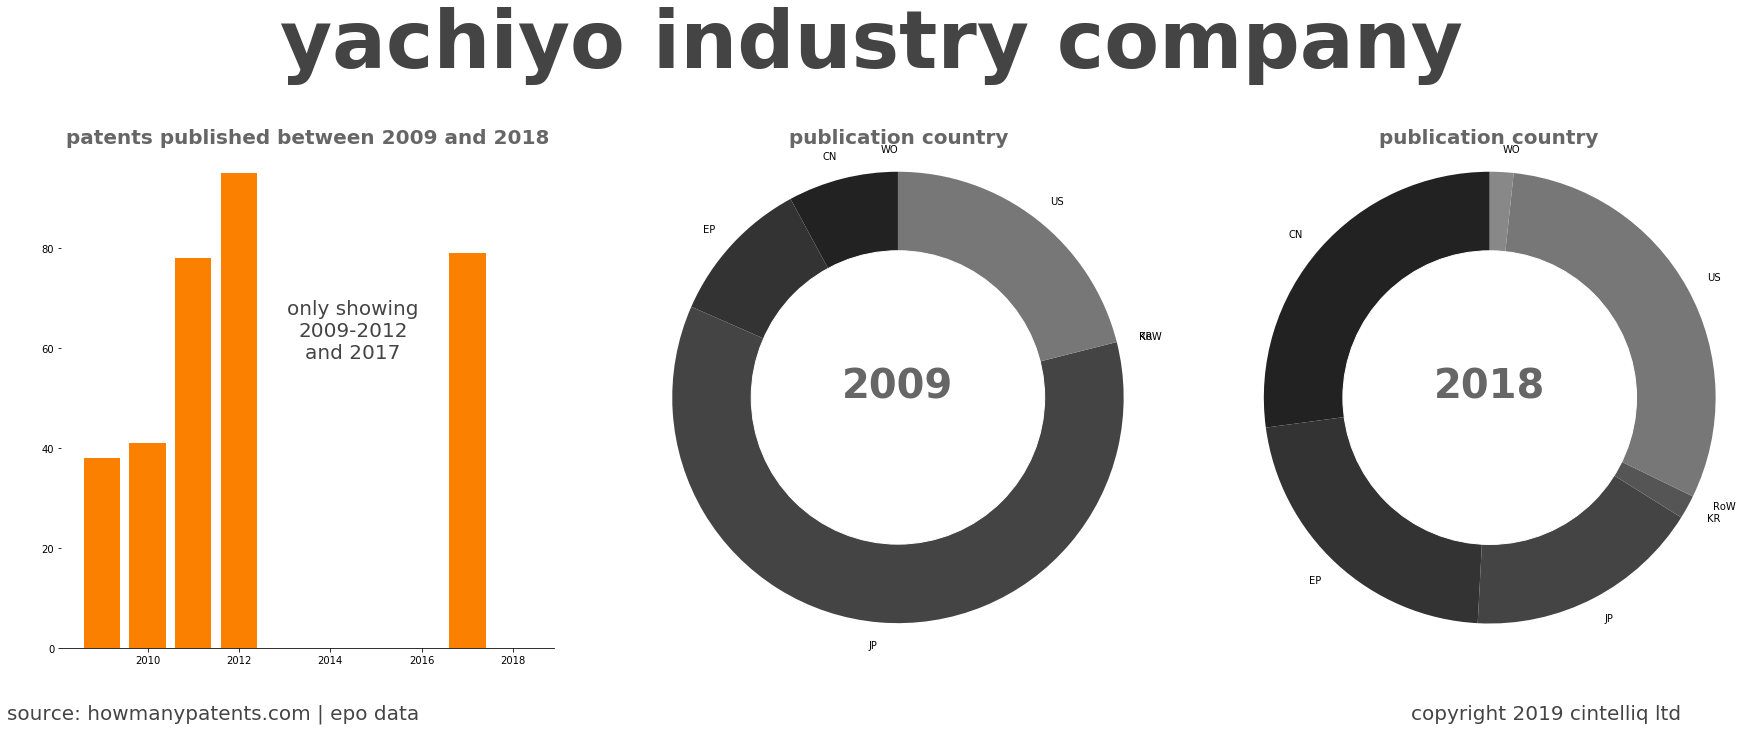 summary of patents for Yachiyo Industry Company